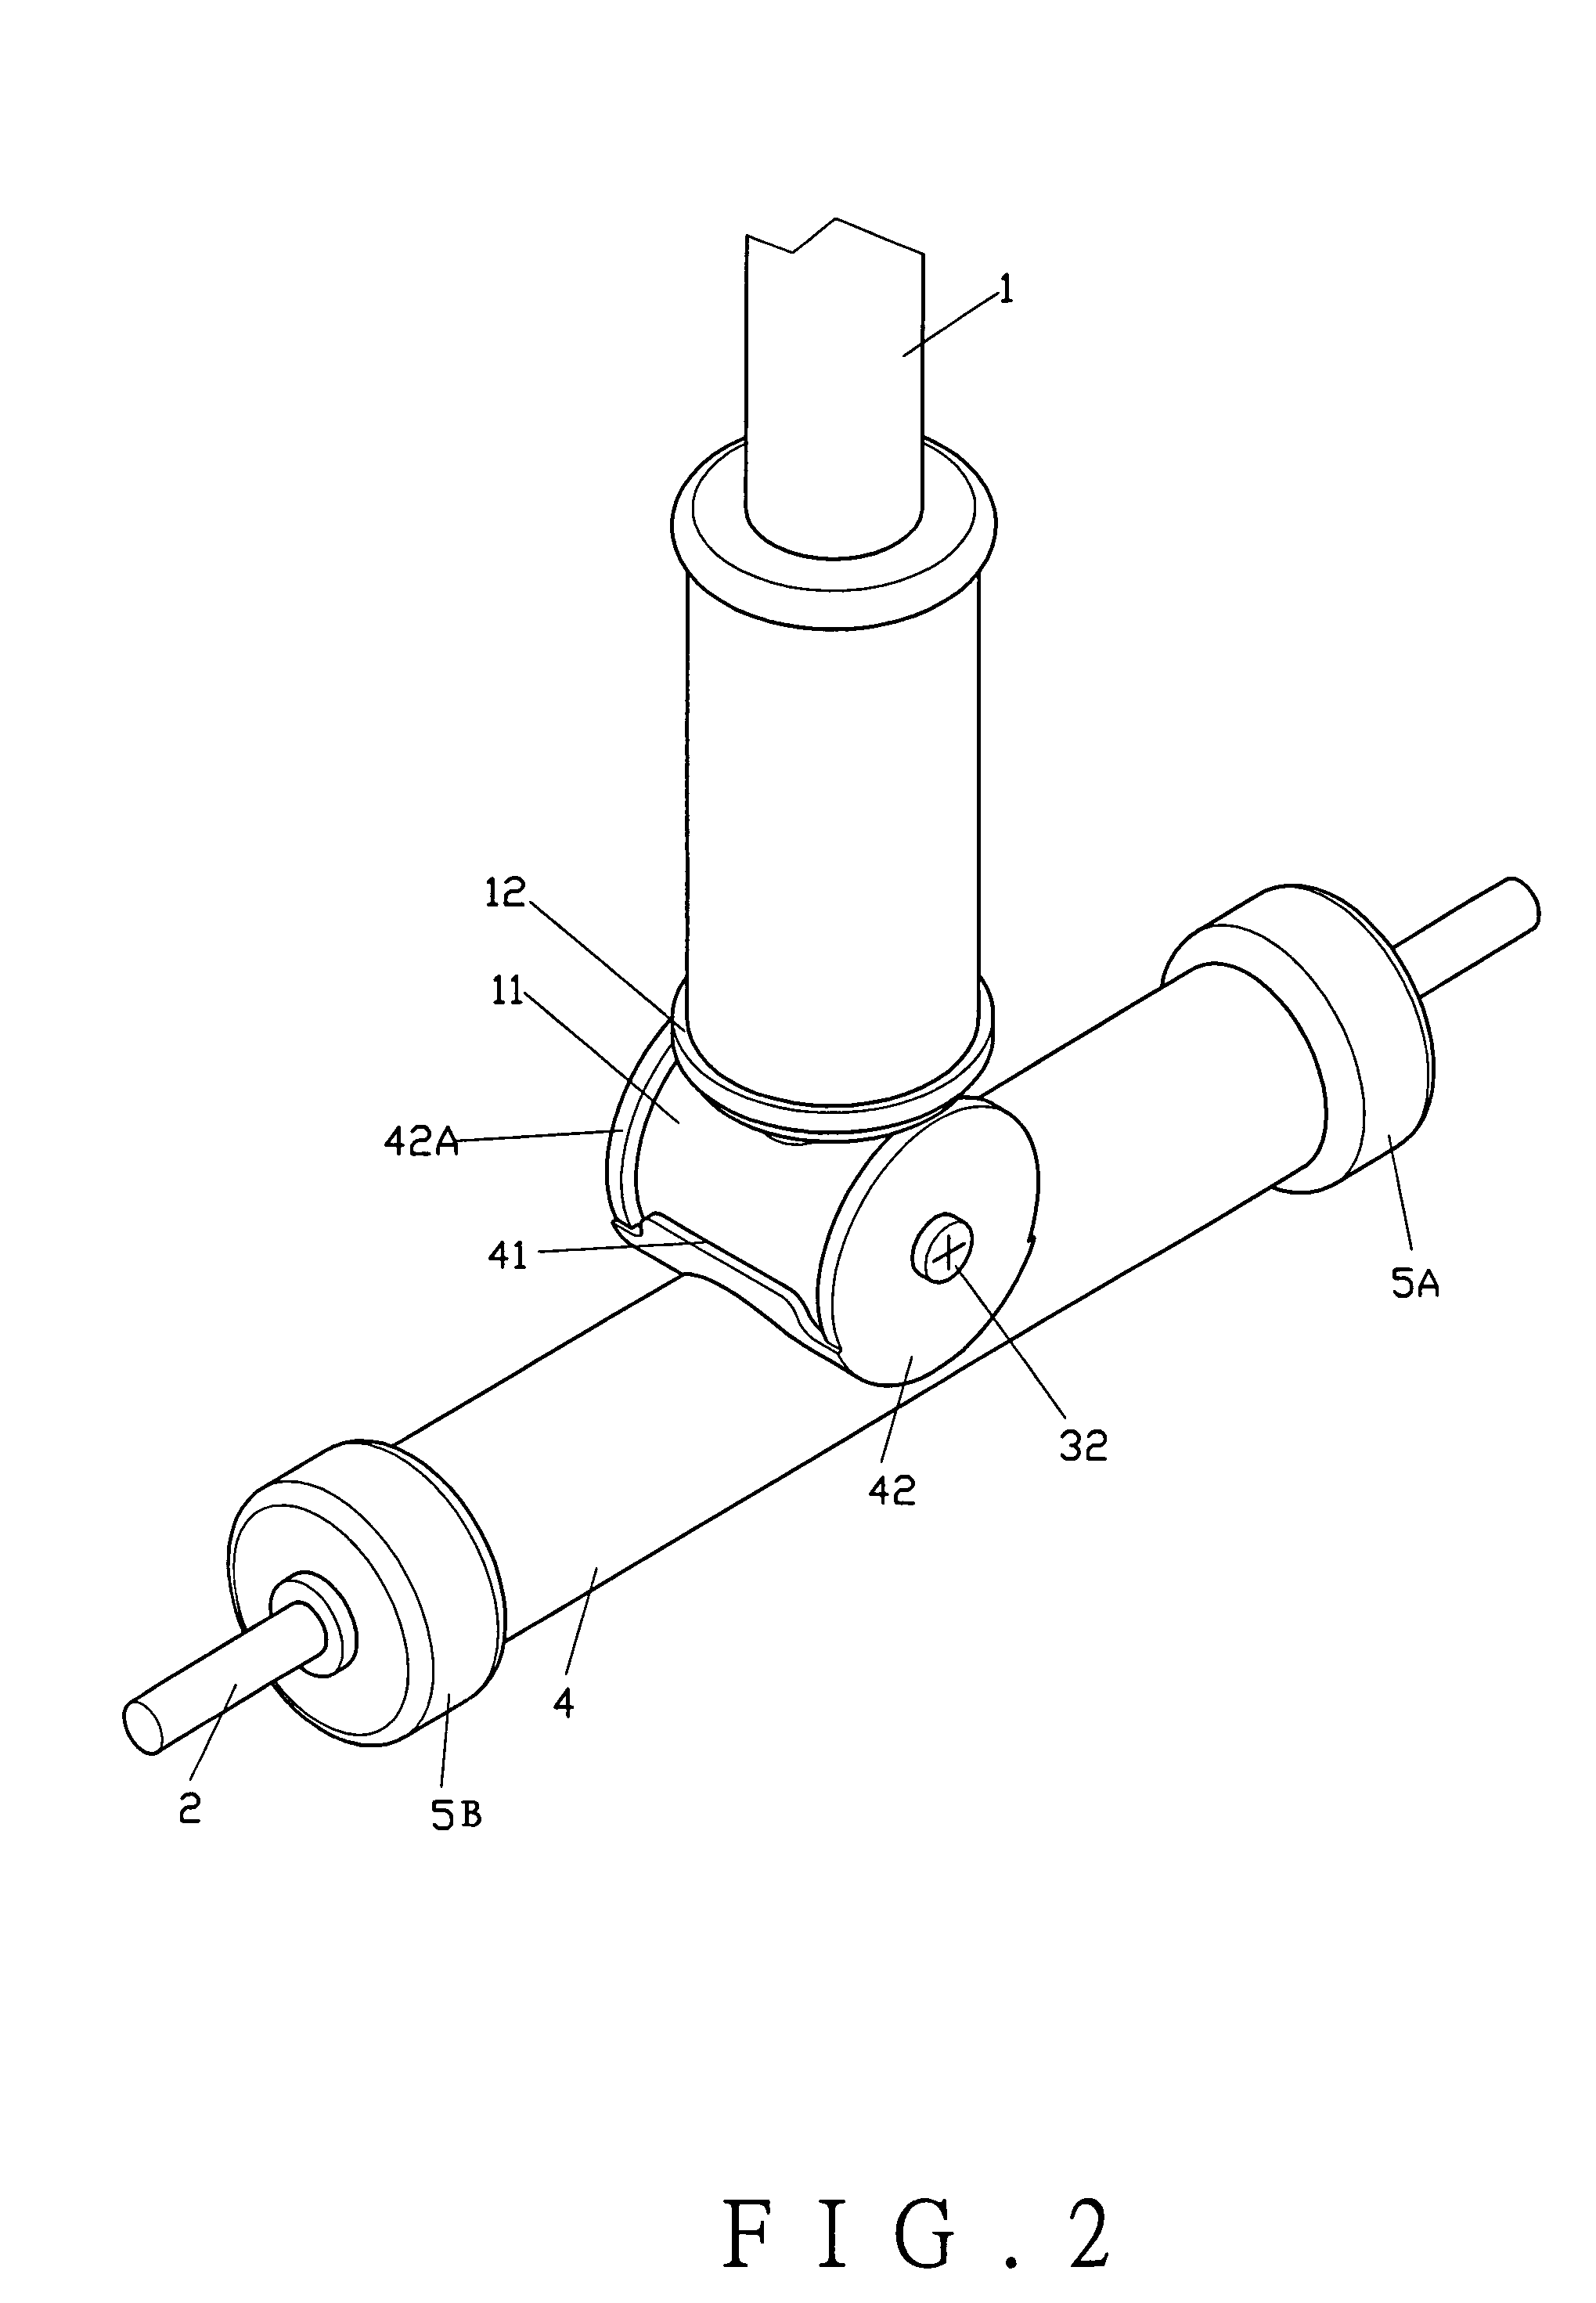 Steering knuckle structure